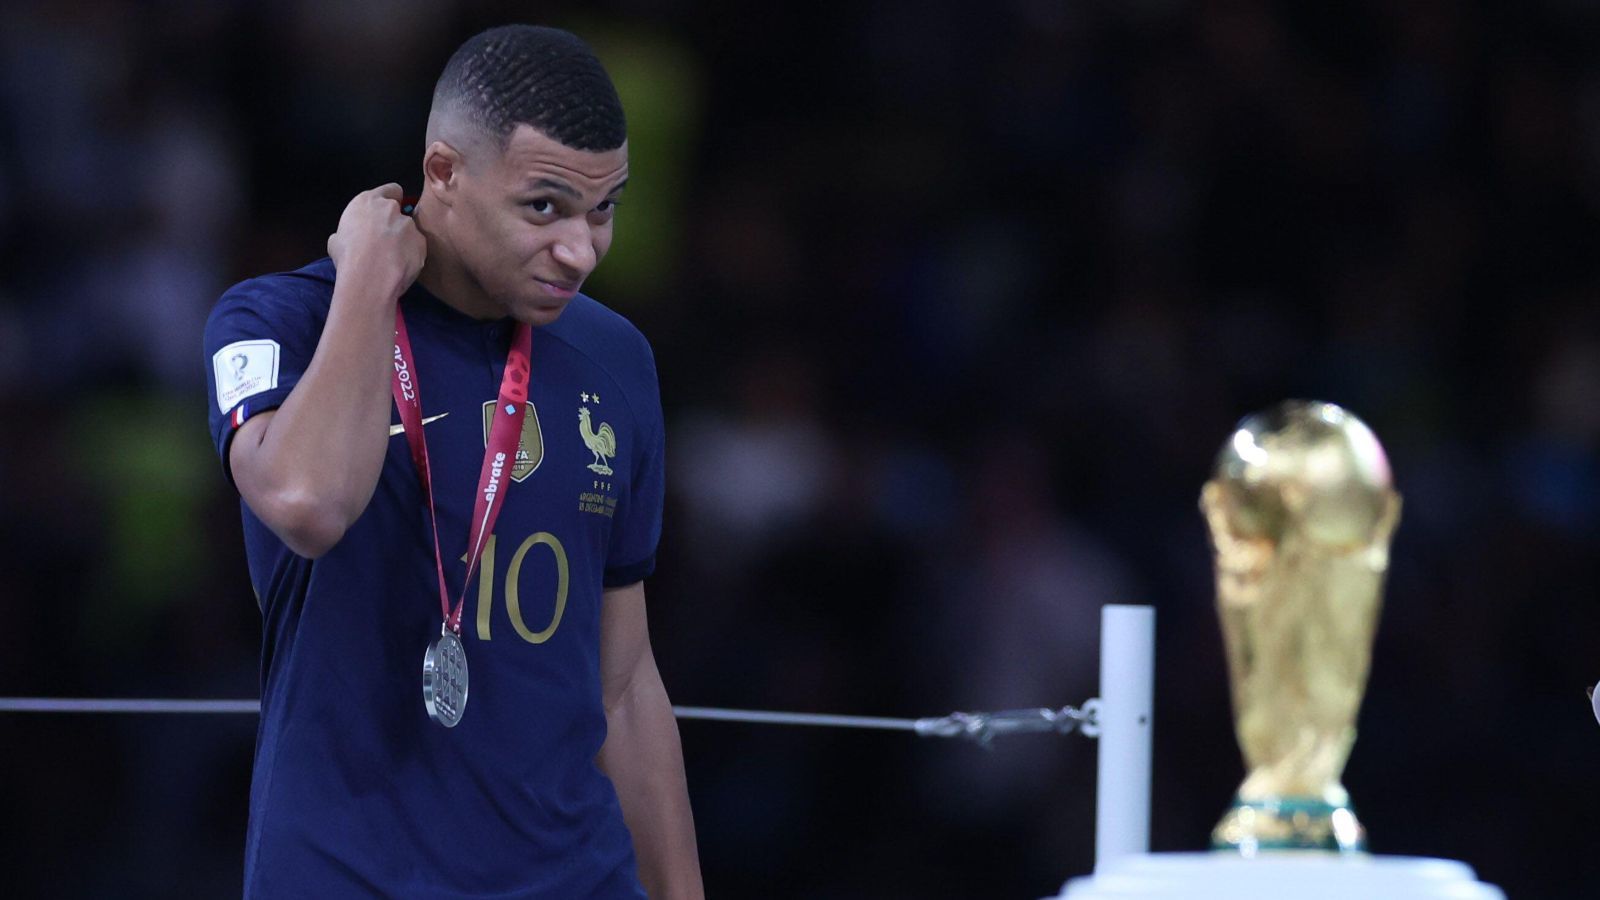 Chief referee of 2022 World Cup finals reveals what Mbappé said after France's defeat